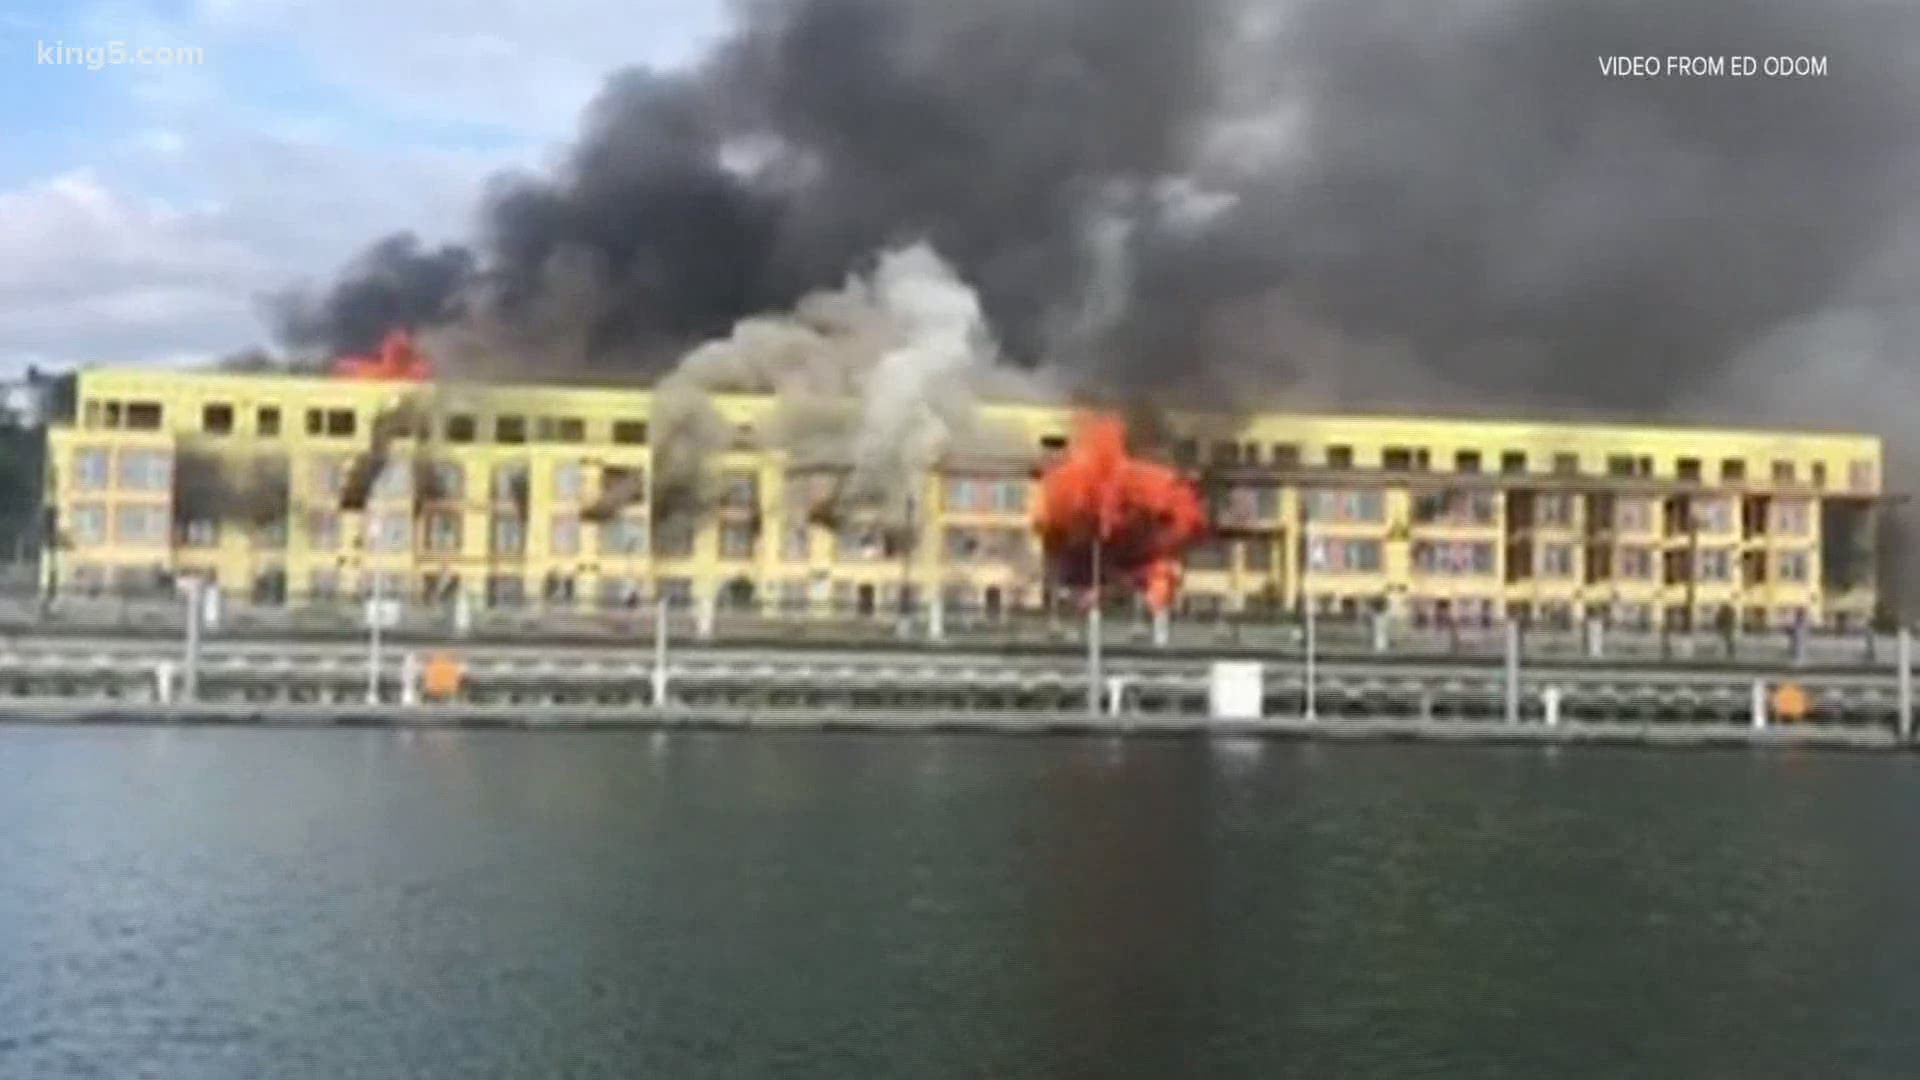 Flames engulfed an apartment building under construction near the Everett Marina on West Marine View Drive.